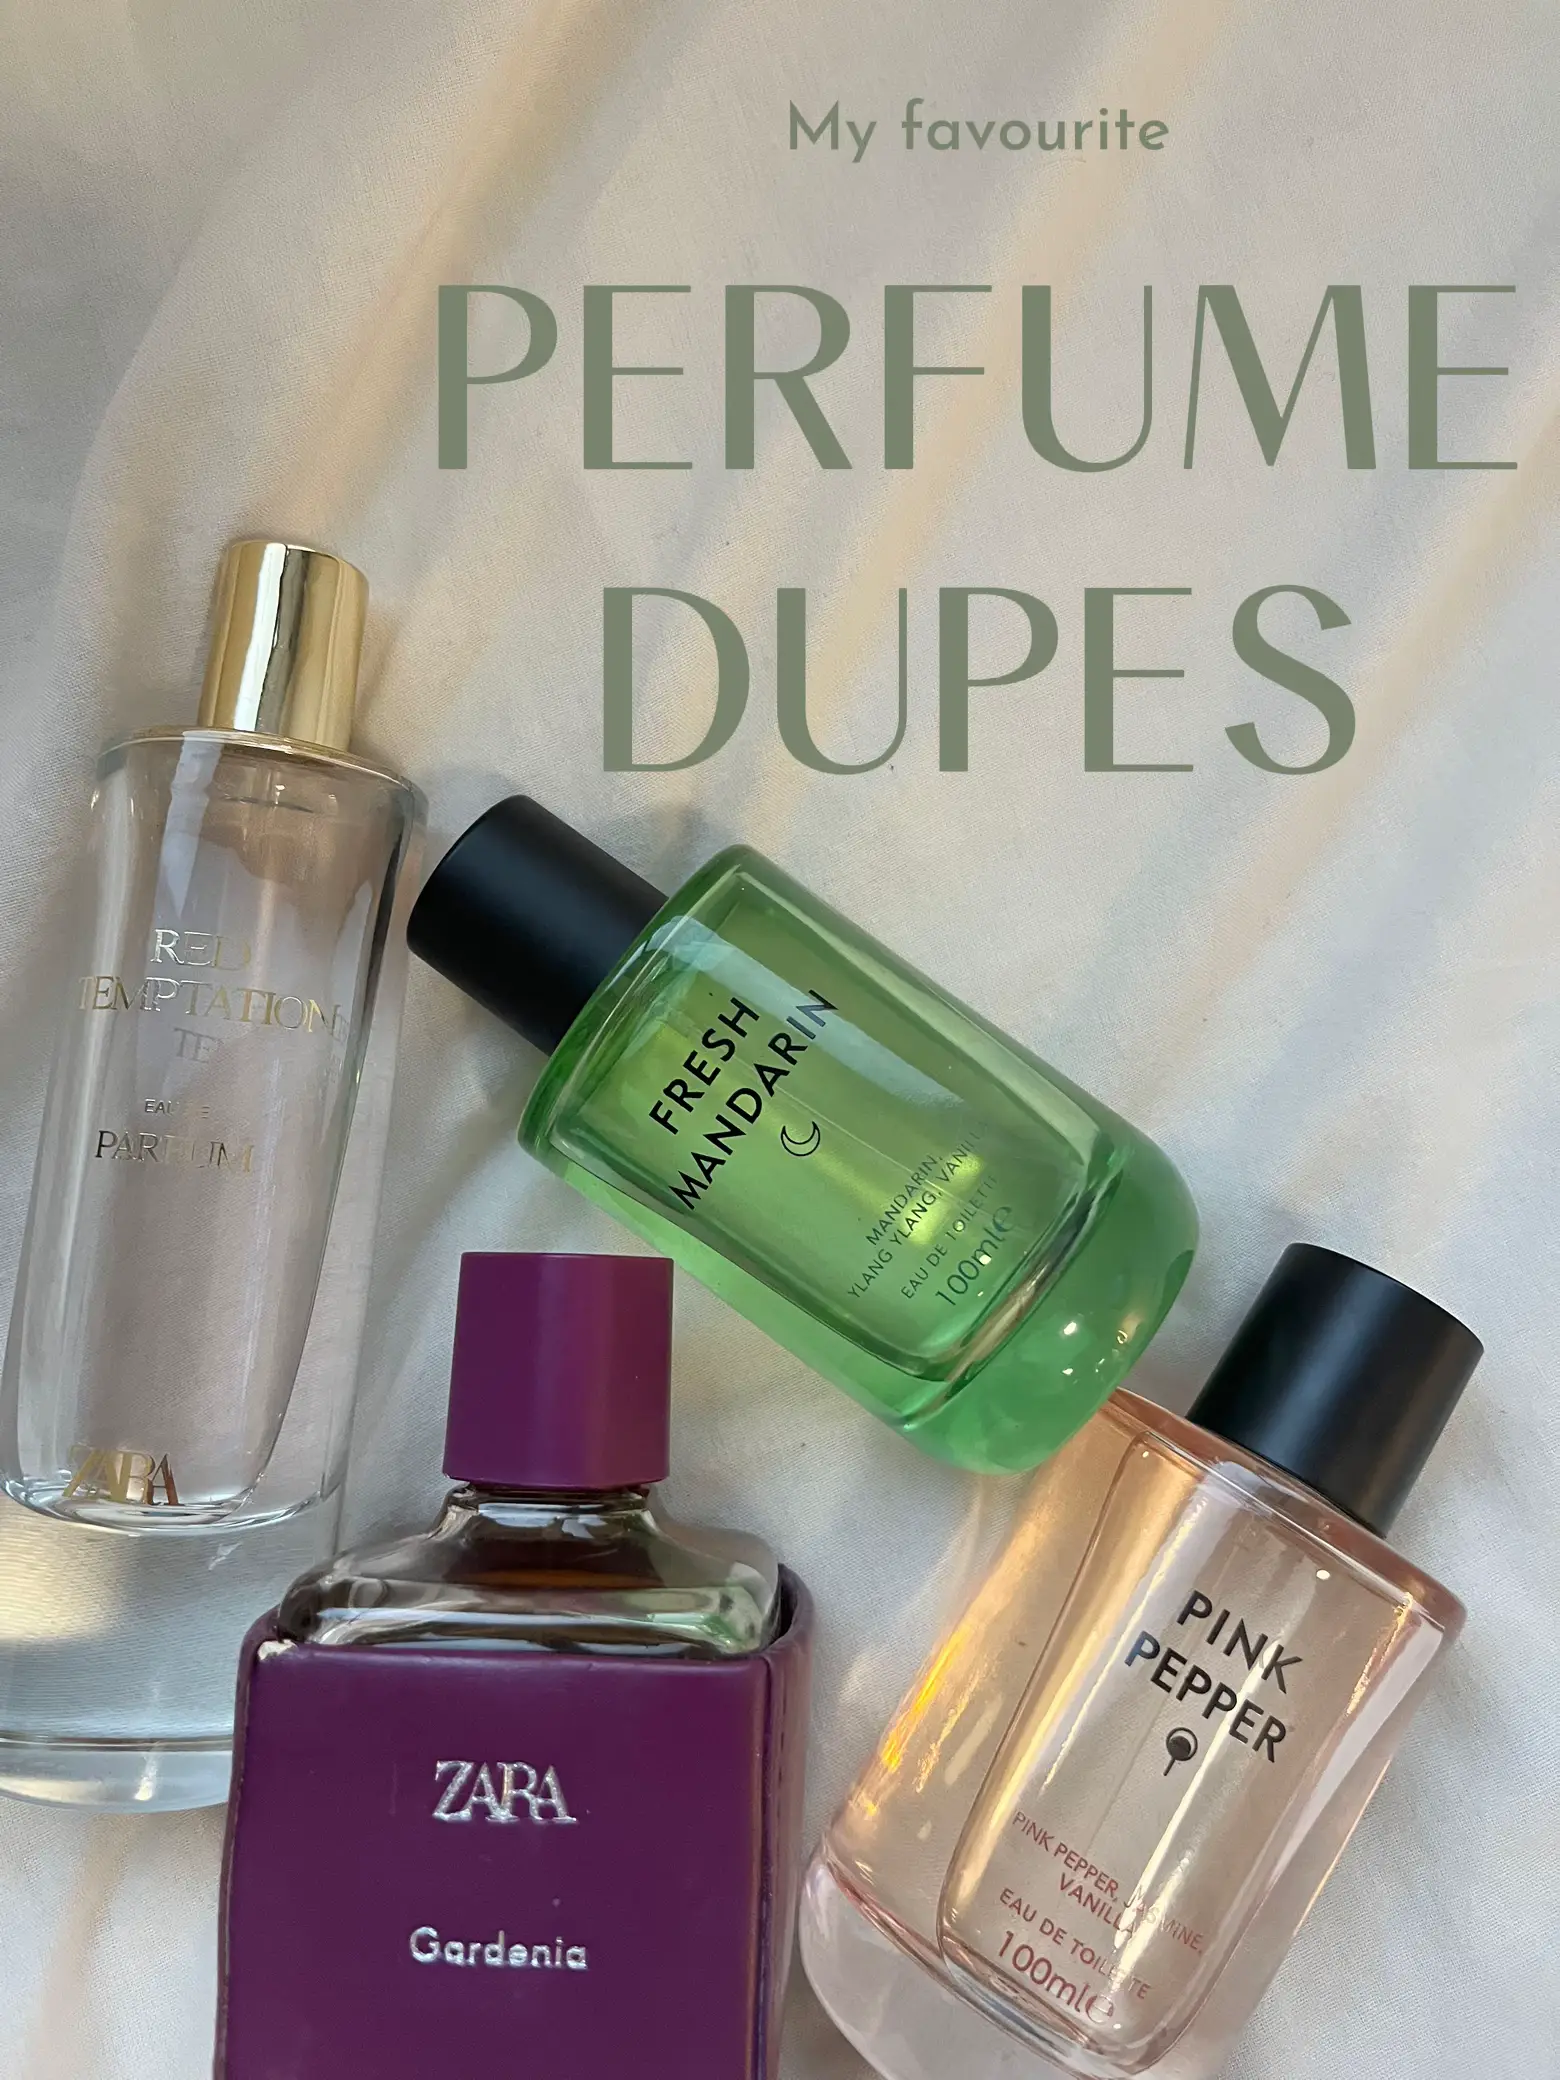 My favourite perfume dupes 🤩, Gallery posted by Pippa Gilroy